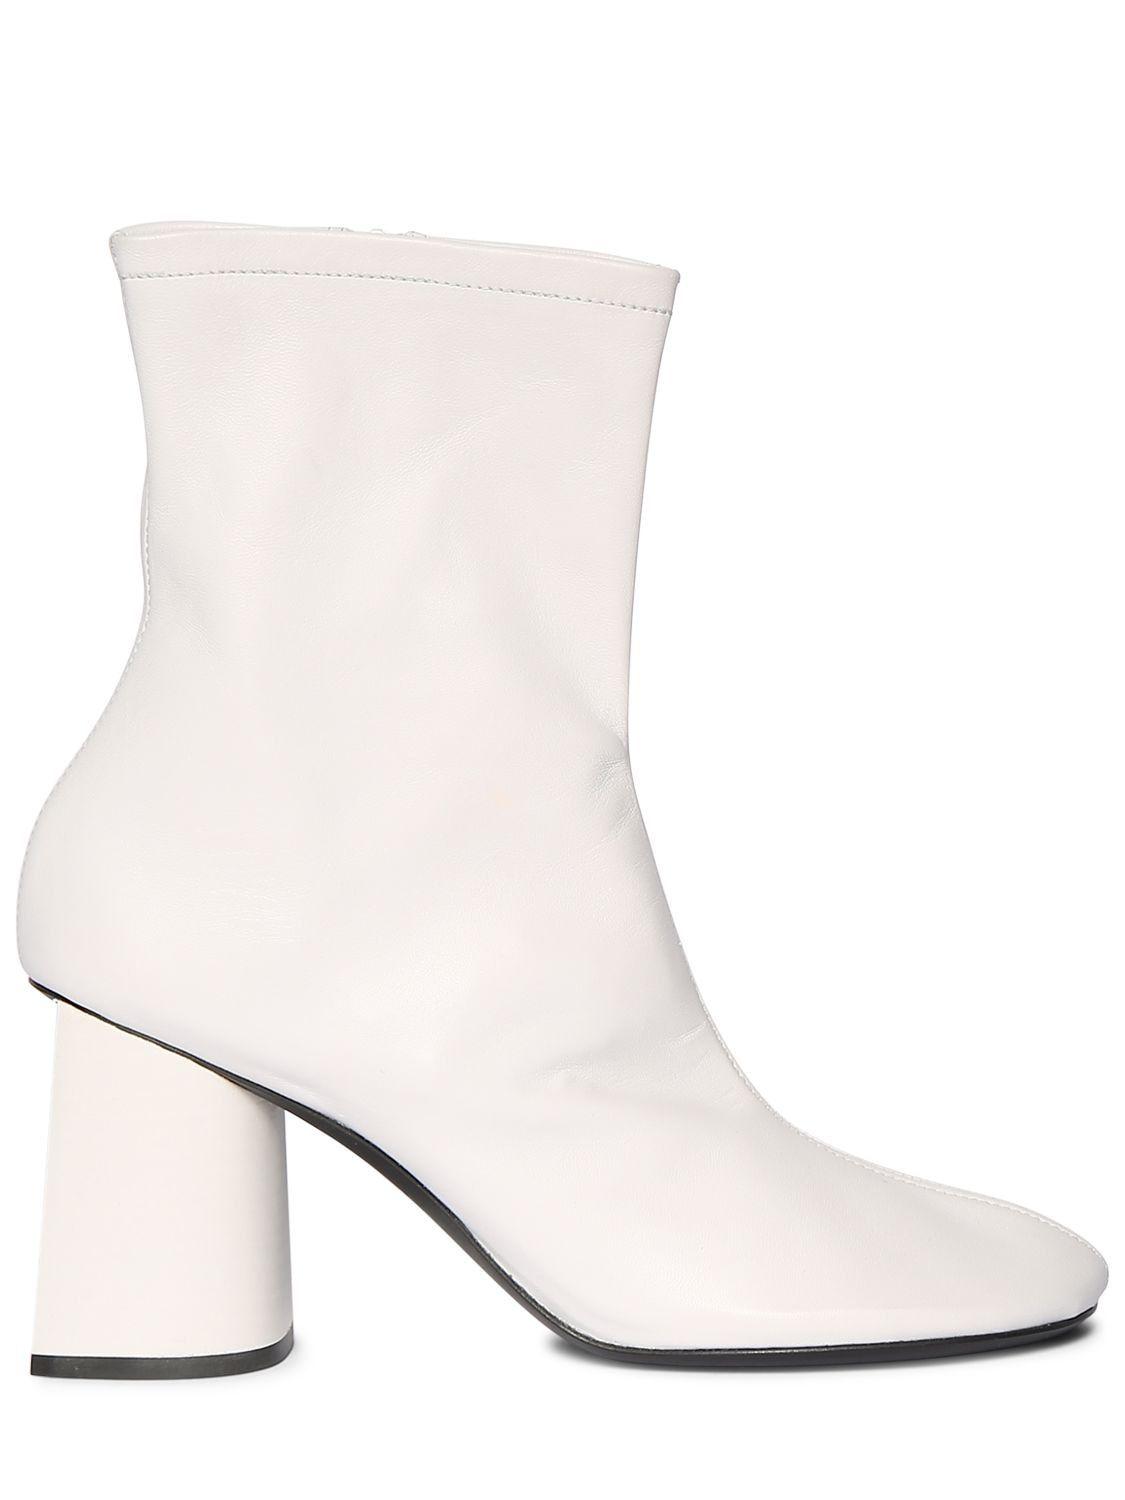 Balenciaga 80mm Glove Shiny Leather Ankle Boots in White | Lyst